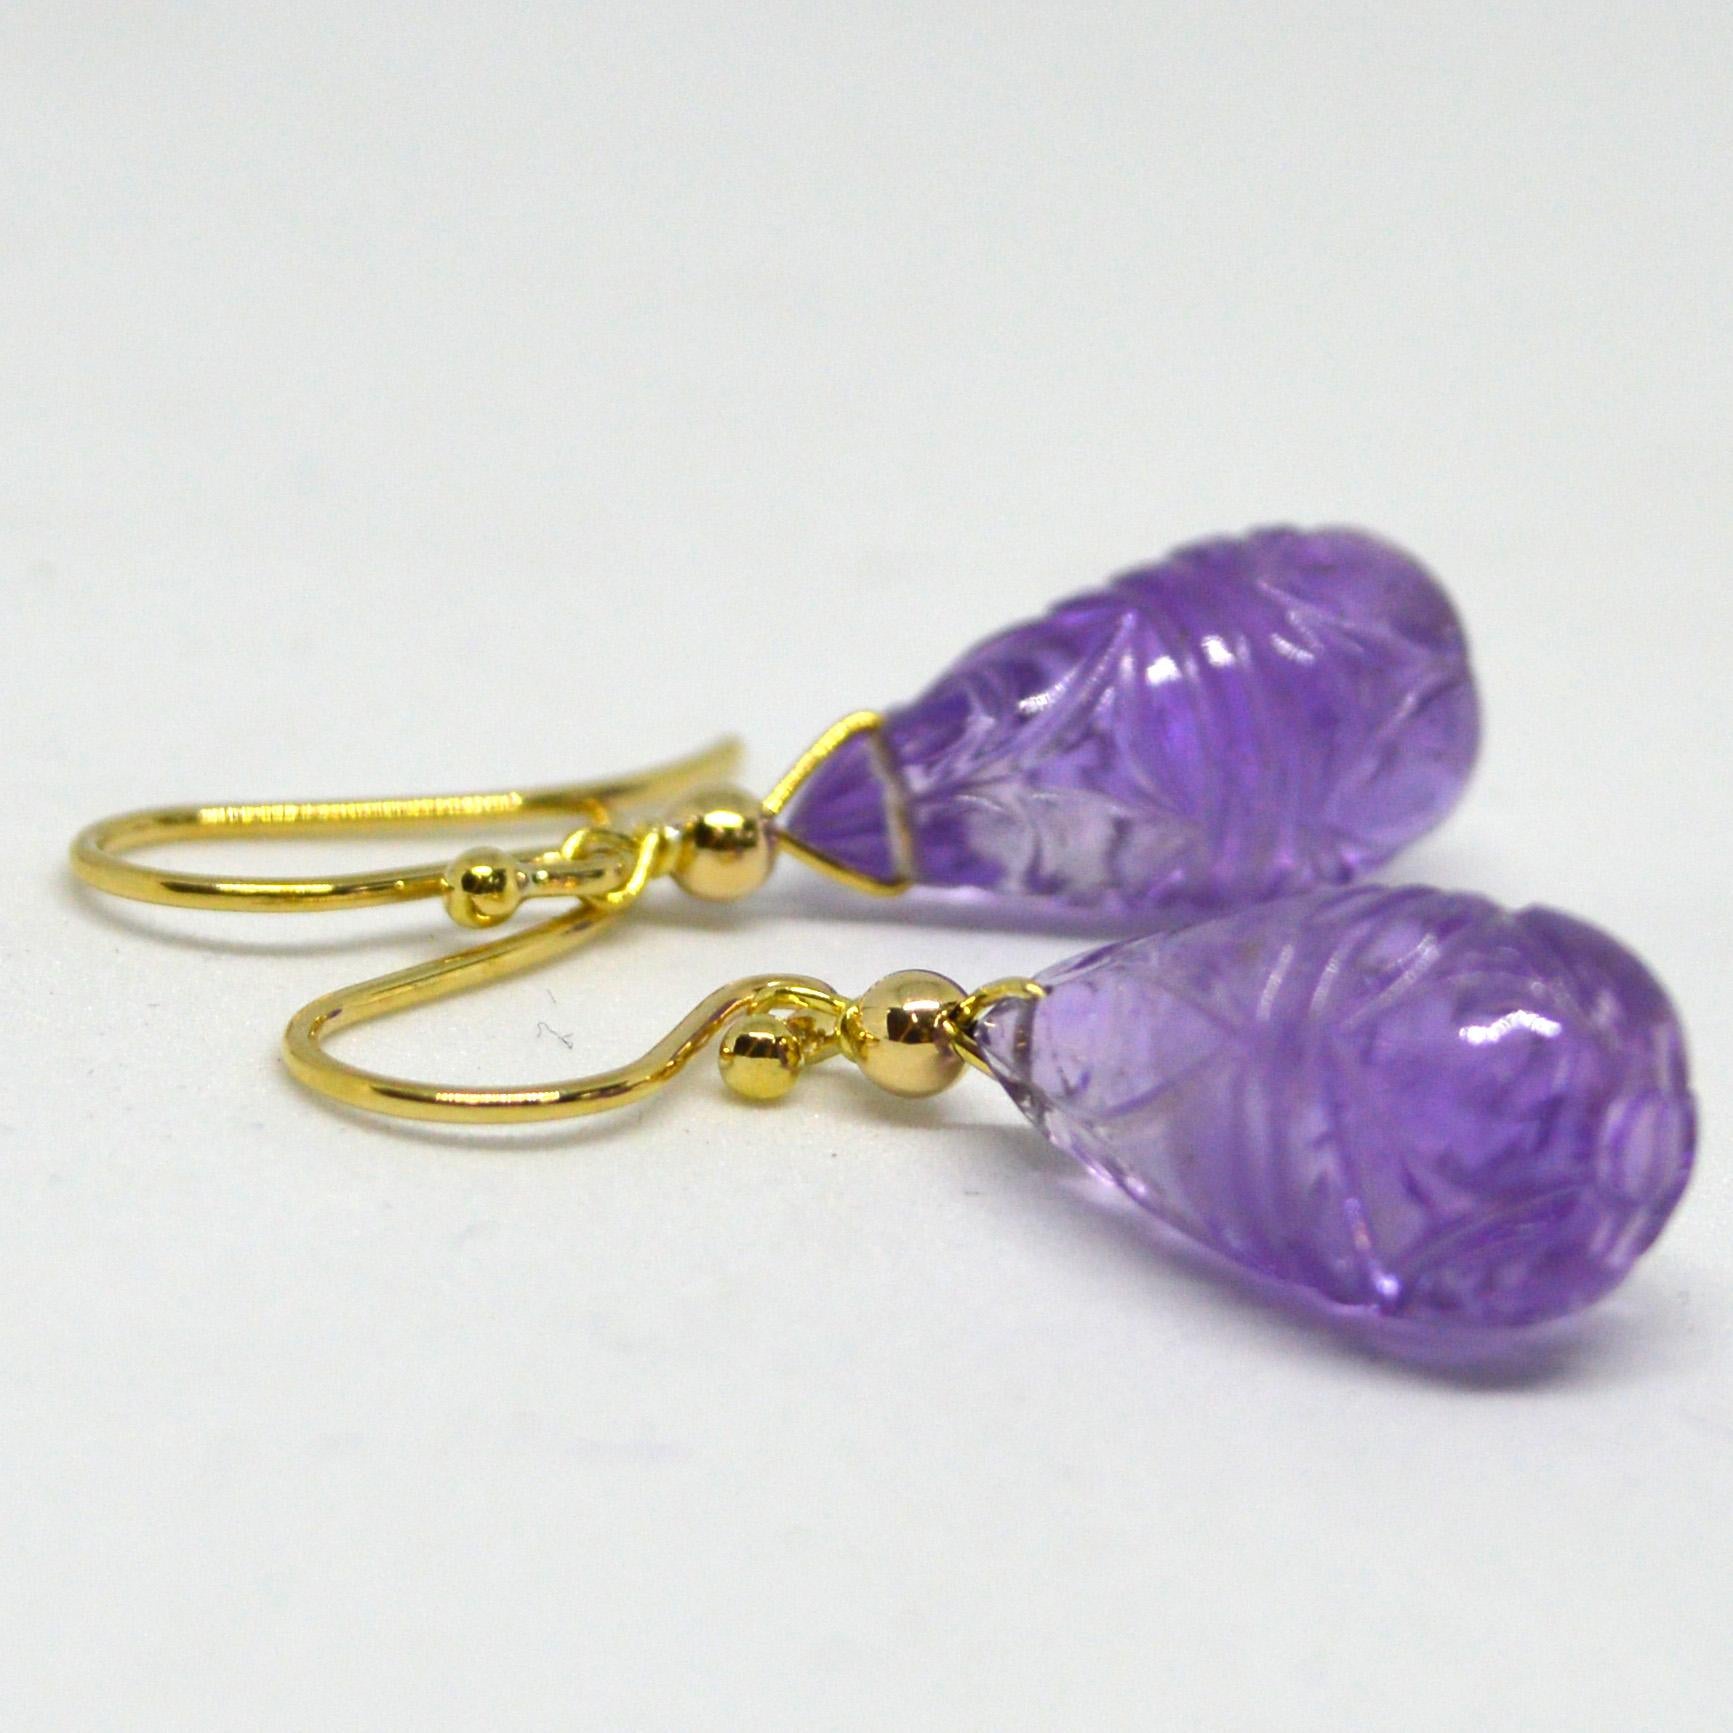 Natural 18mm Carved Amethyst on 9ct yellow Gold Sheppard,  14k Gold wire and 3mm round bead.

Total Earring length 36mm.